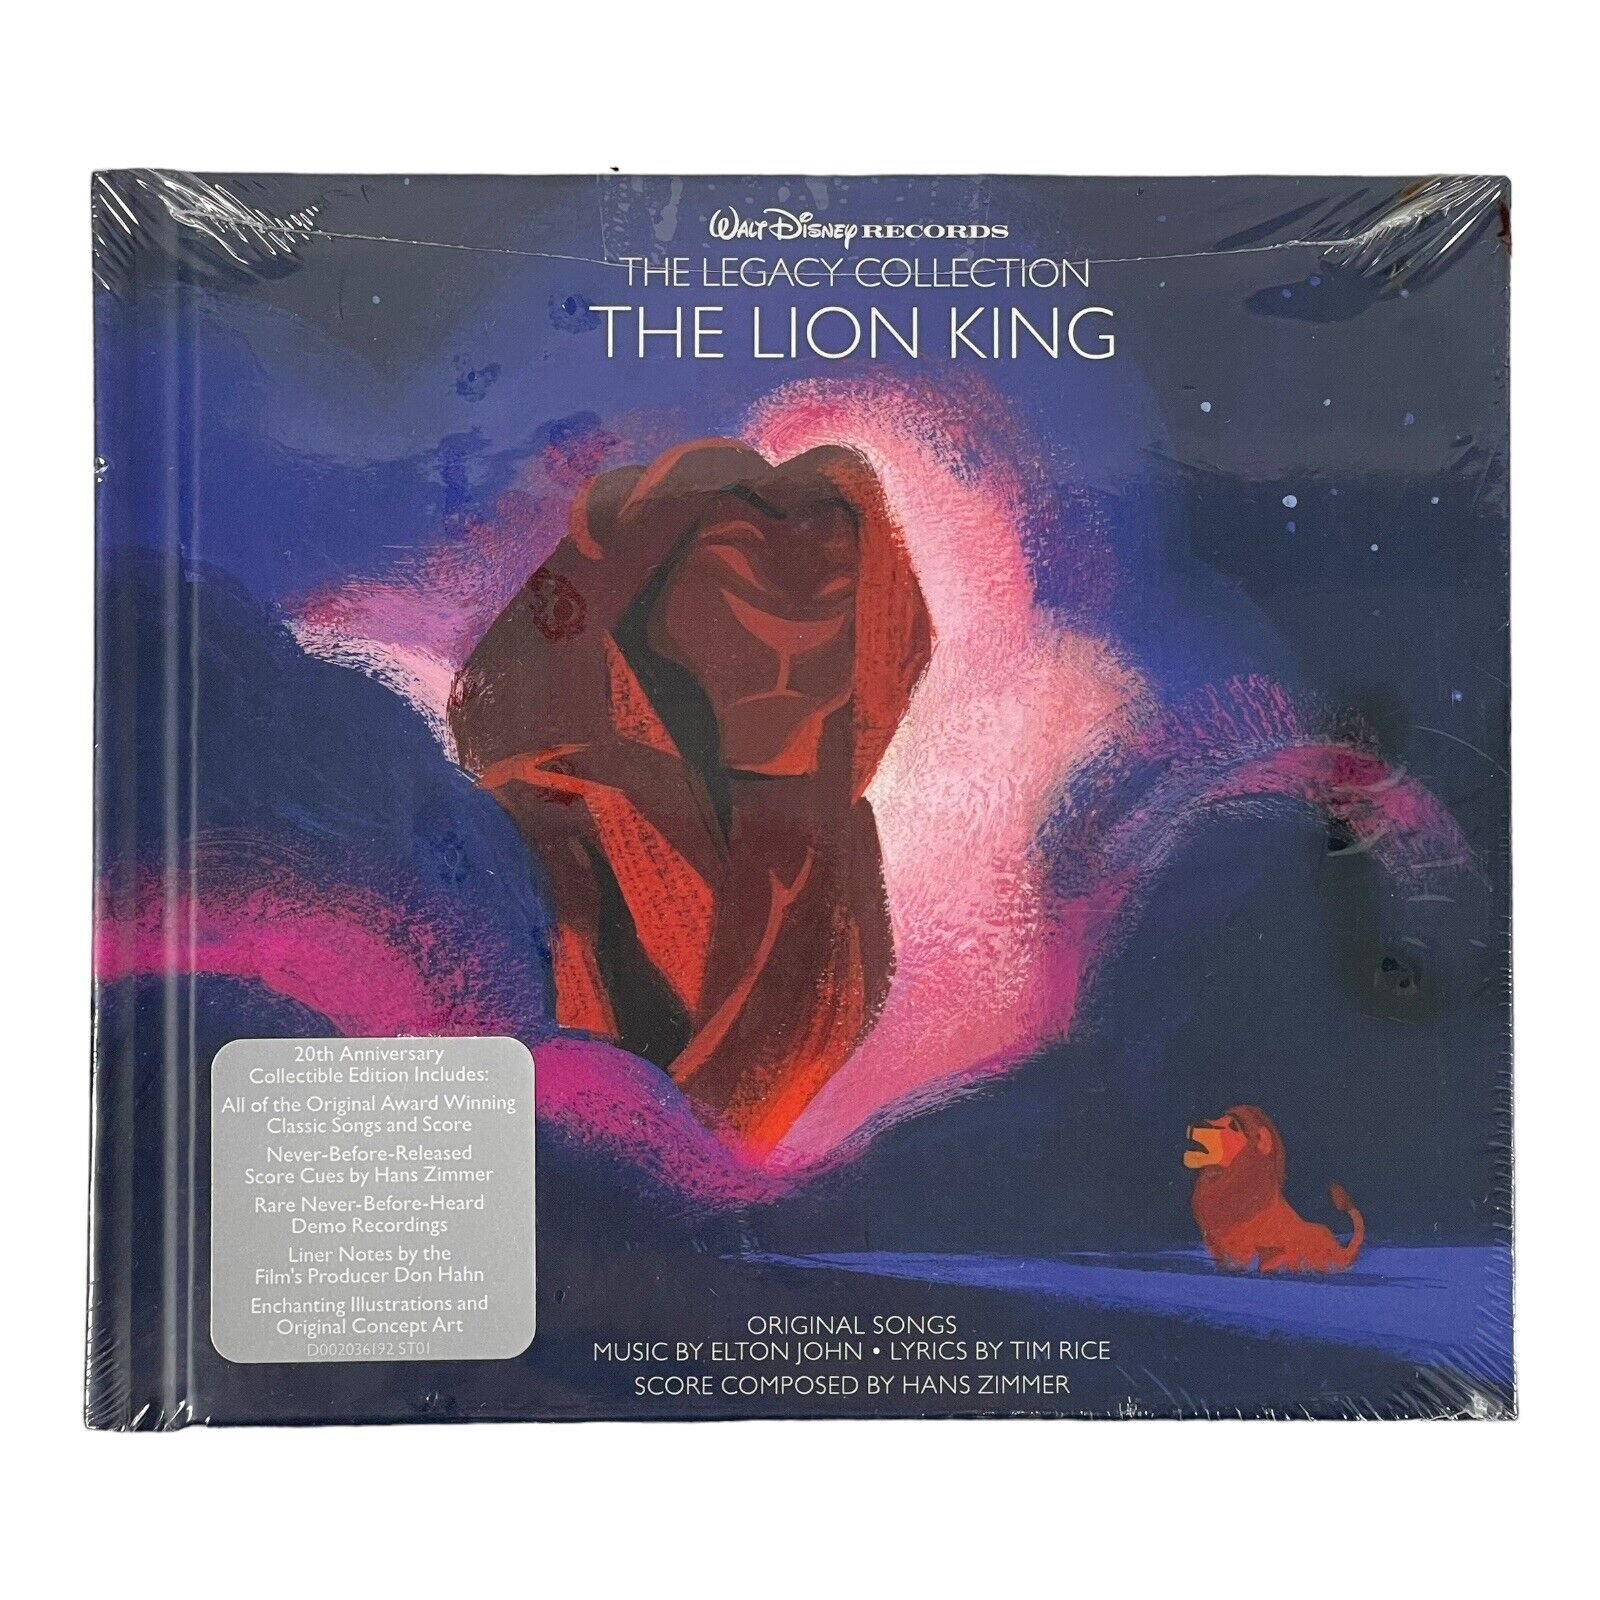 The Lion King Walt Disney Records Legacy Collection 20th Anniversary Music CD